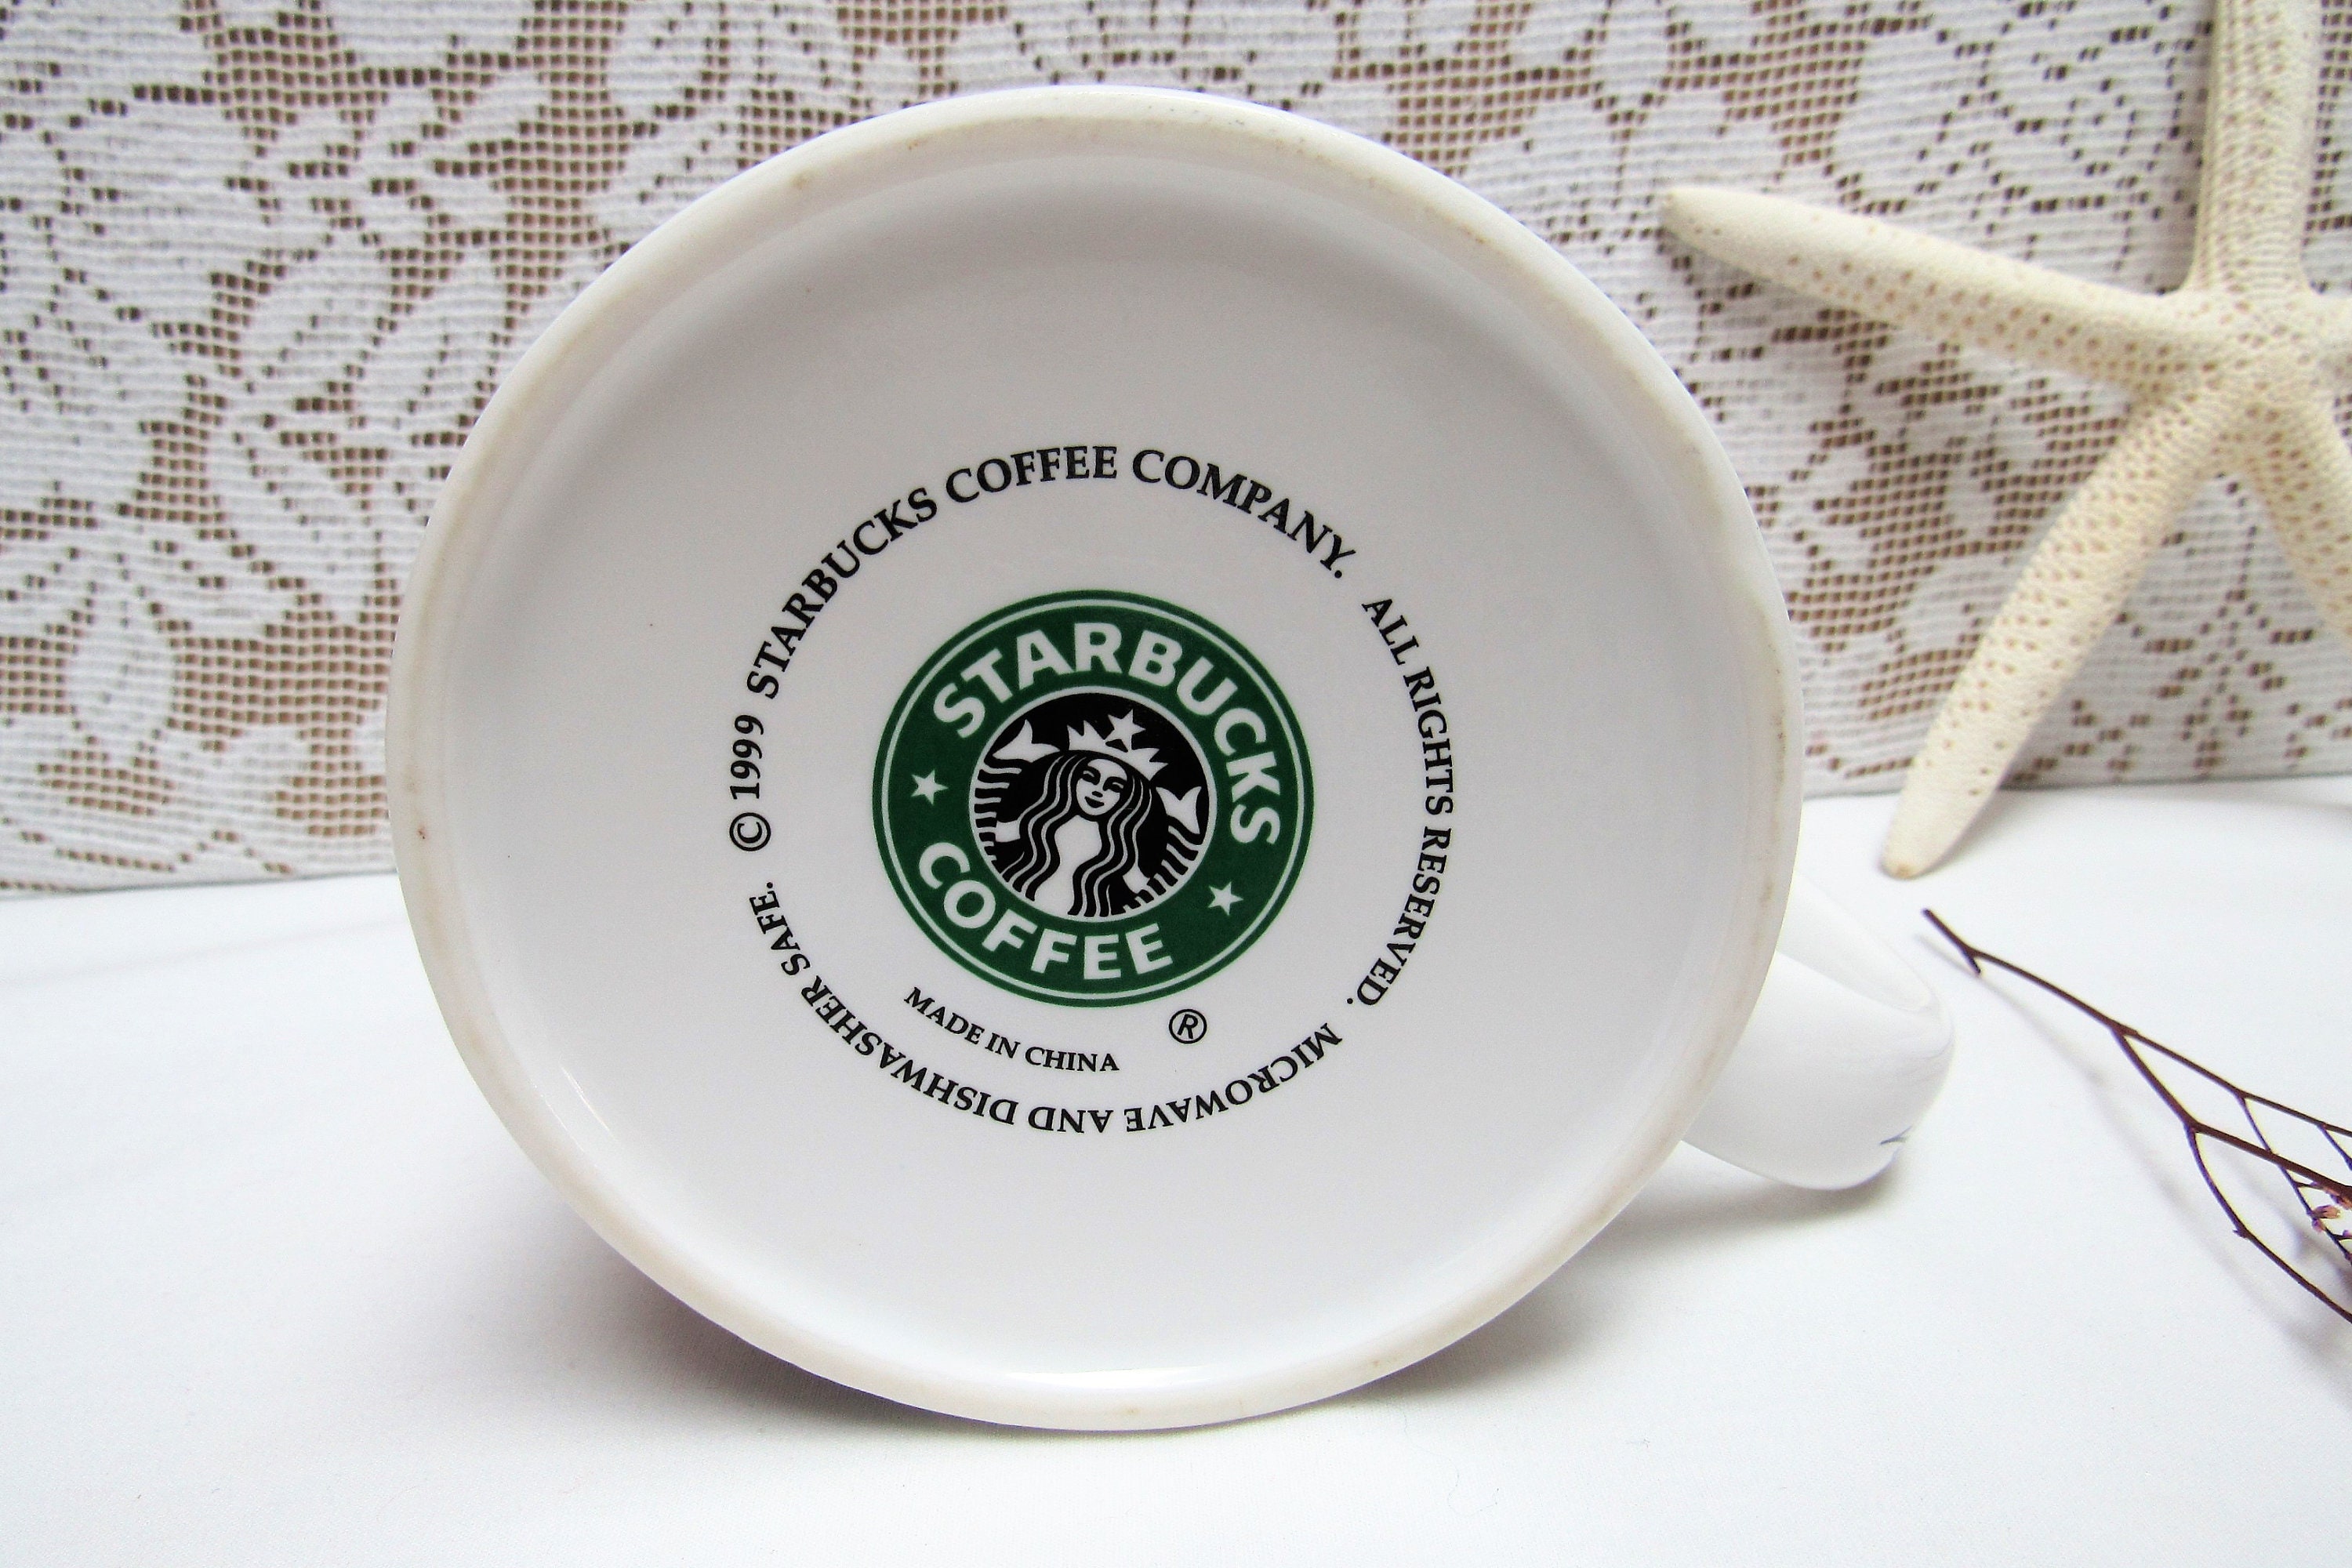 Starbucks Texas Coffee Mug with Limited Edition Texas Starbucks Gift Card  Collectible No Value, Been…See more Starbucks Texas Coffee Mug with Limited